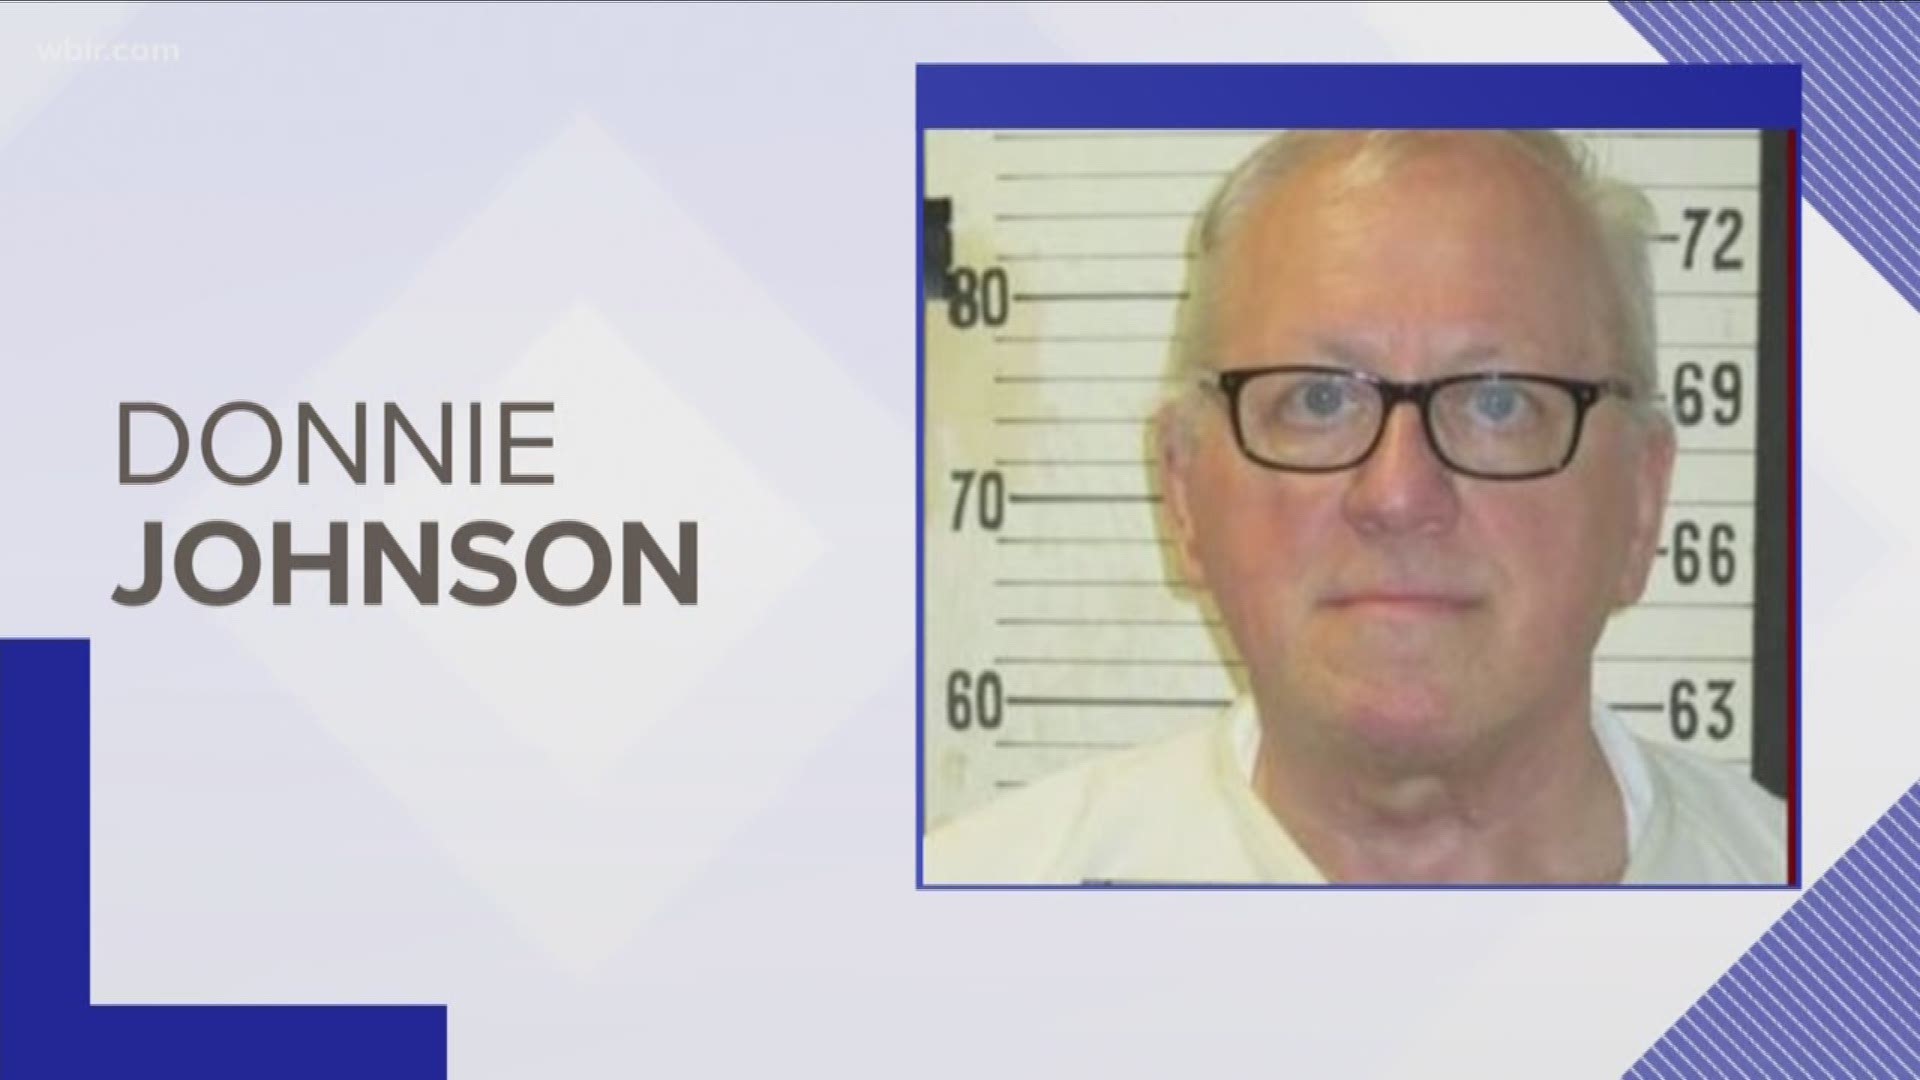 Governor Bill Lee won't intervene in the execution of Donnie Johnson, which is set to take place Thursday by lethal injection. The Memphis man was convicted of killing his wife in 1984.